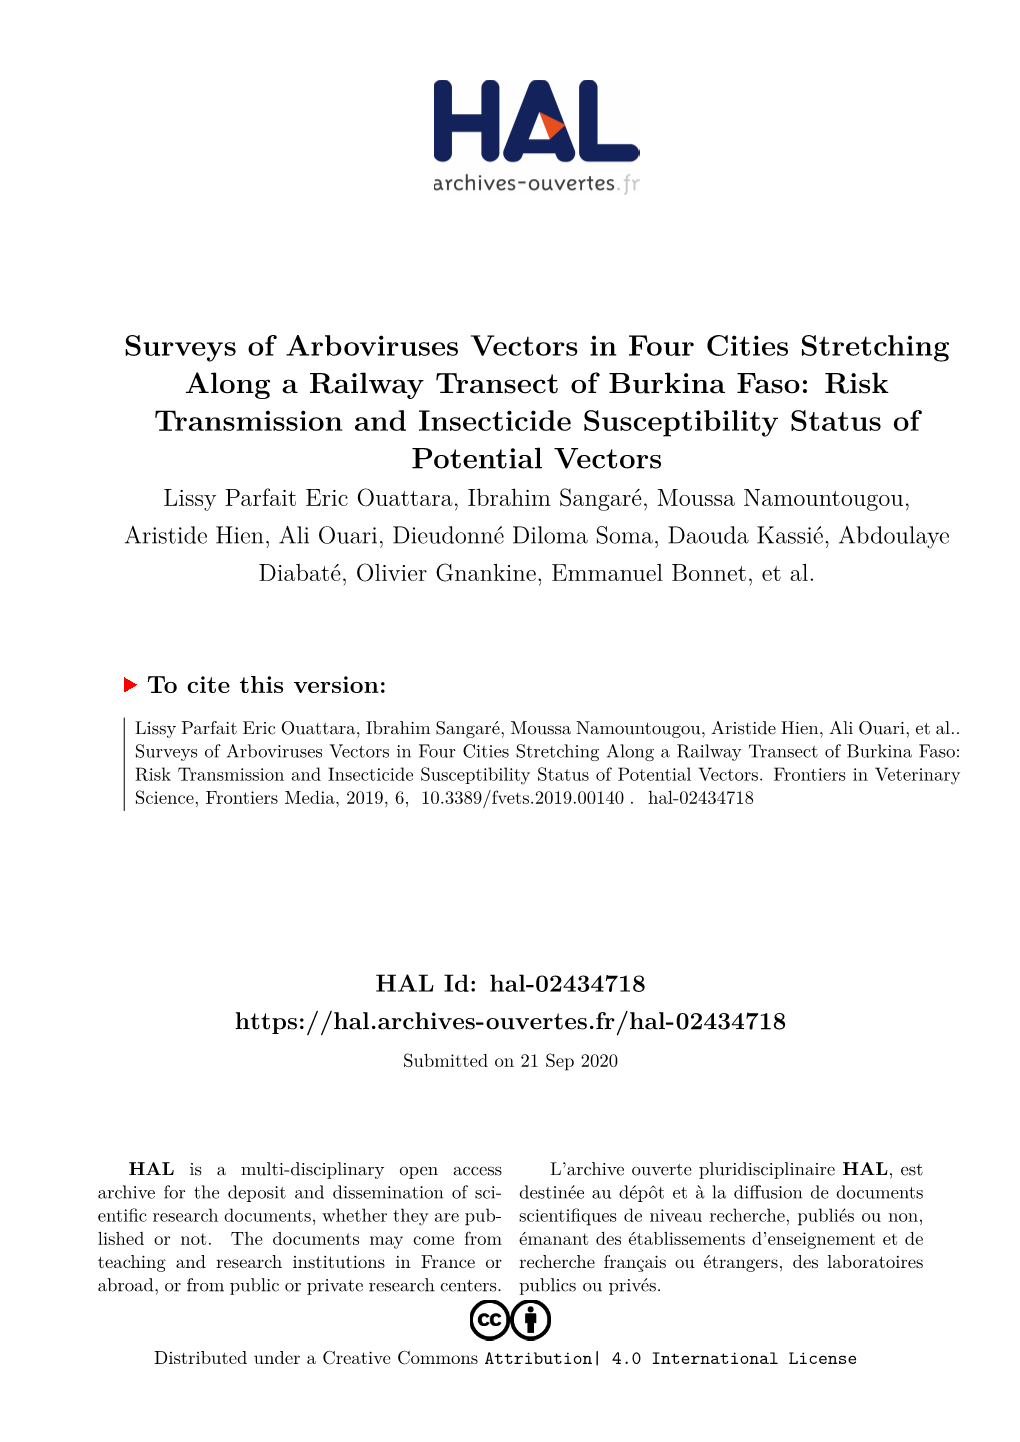 Surveys of Arboviruses Vectors in Four Cities Stretching Along A